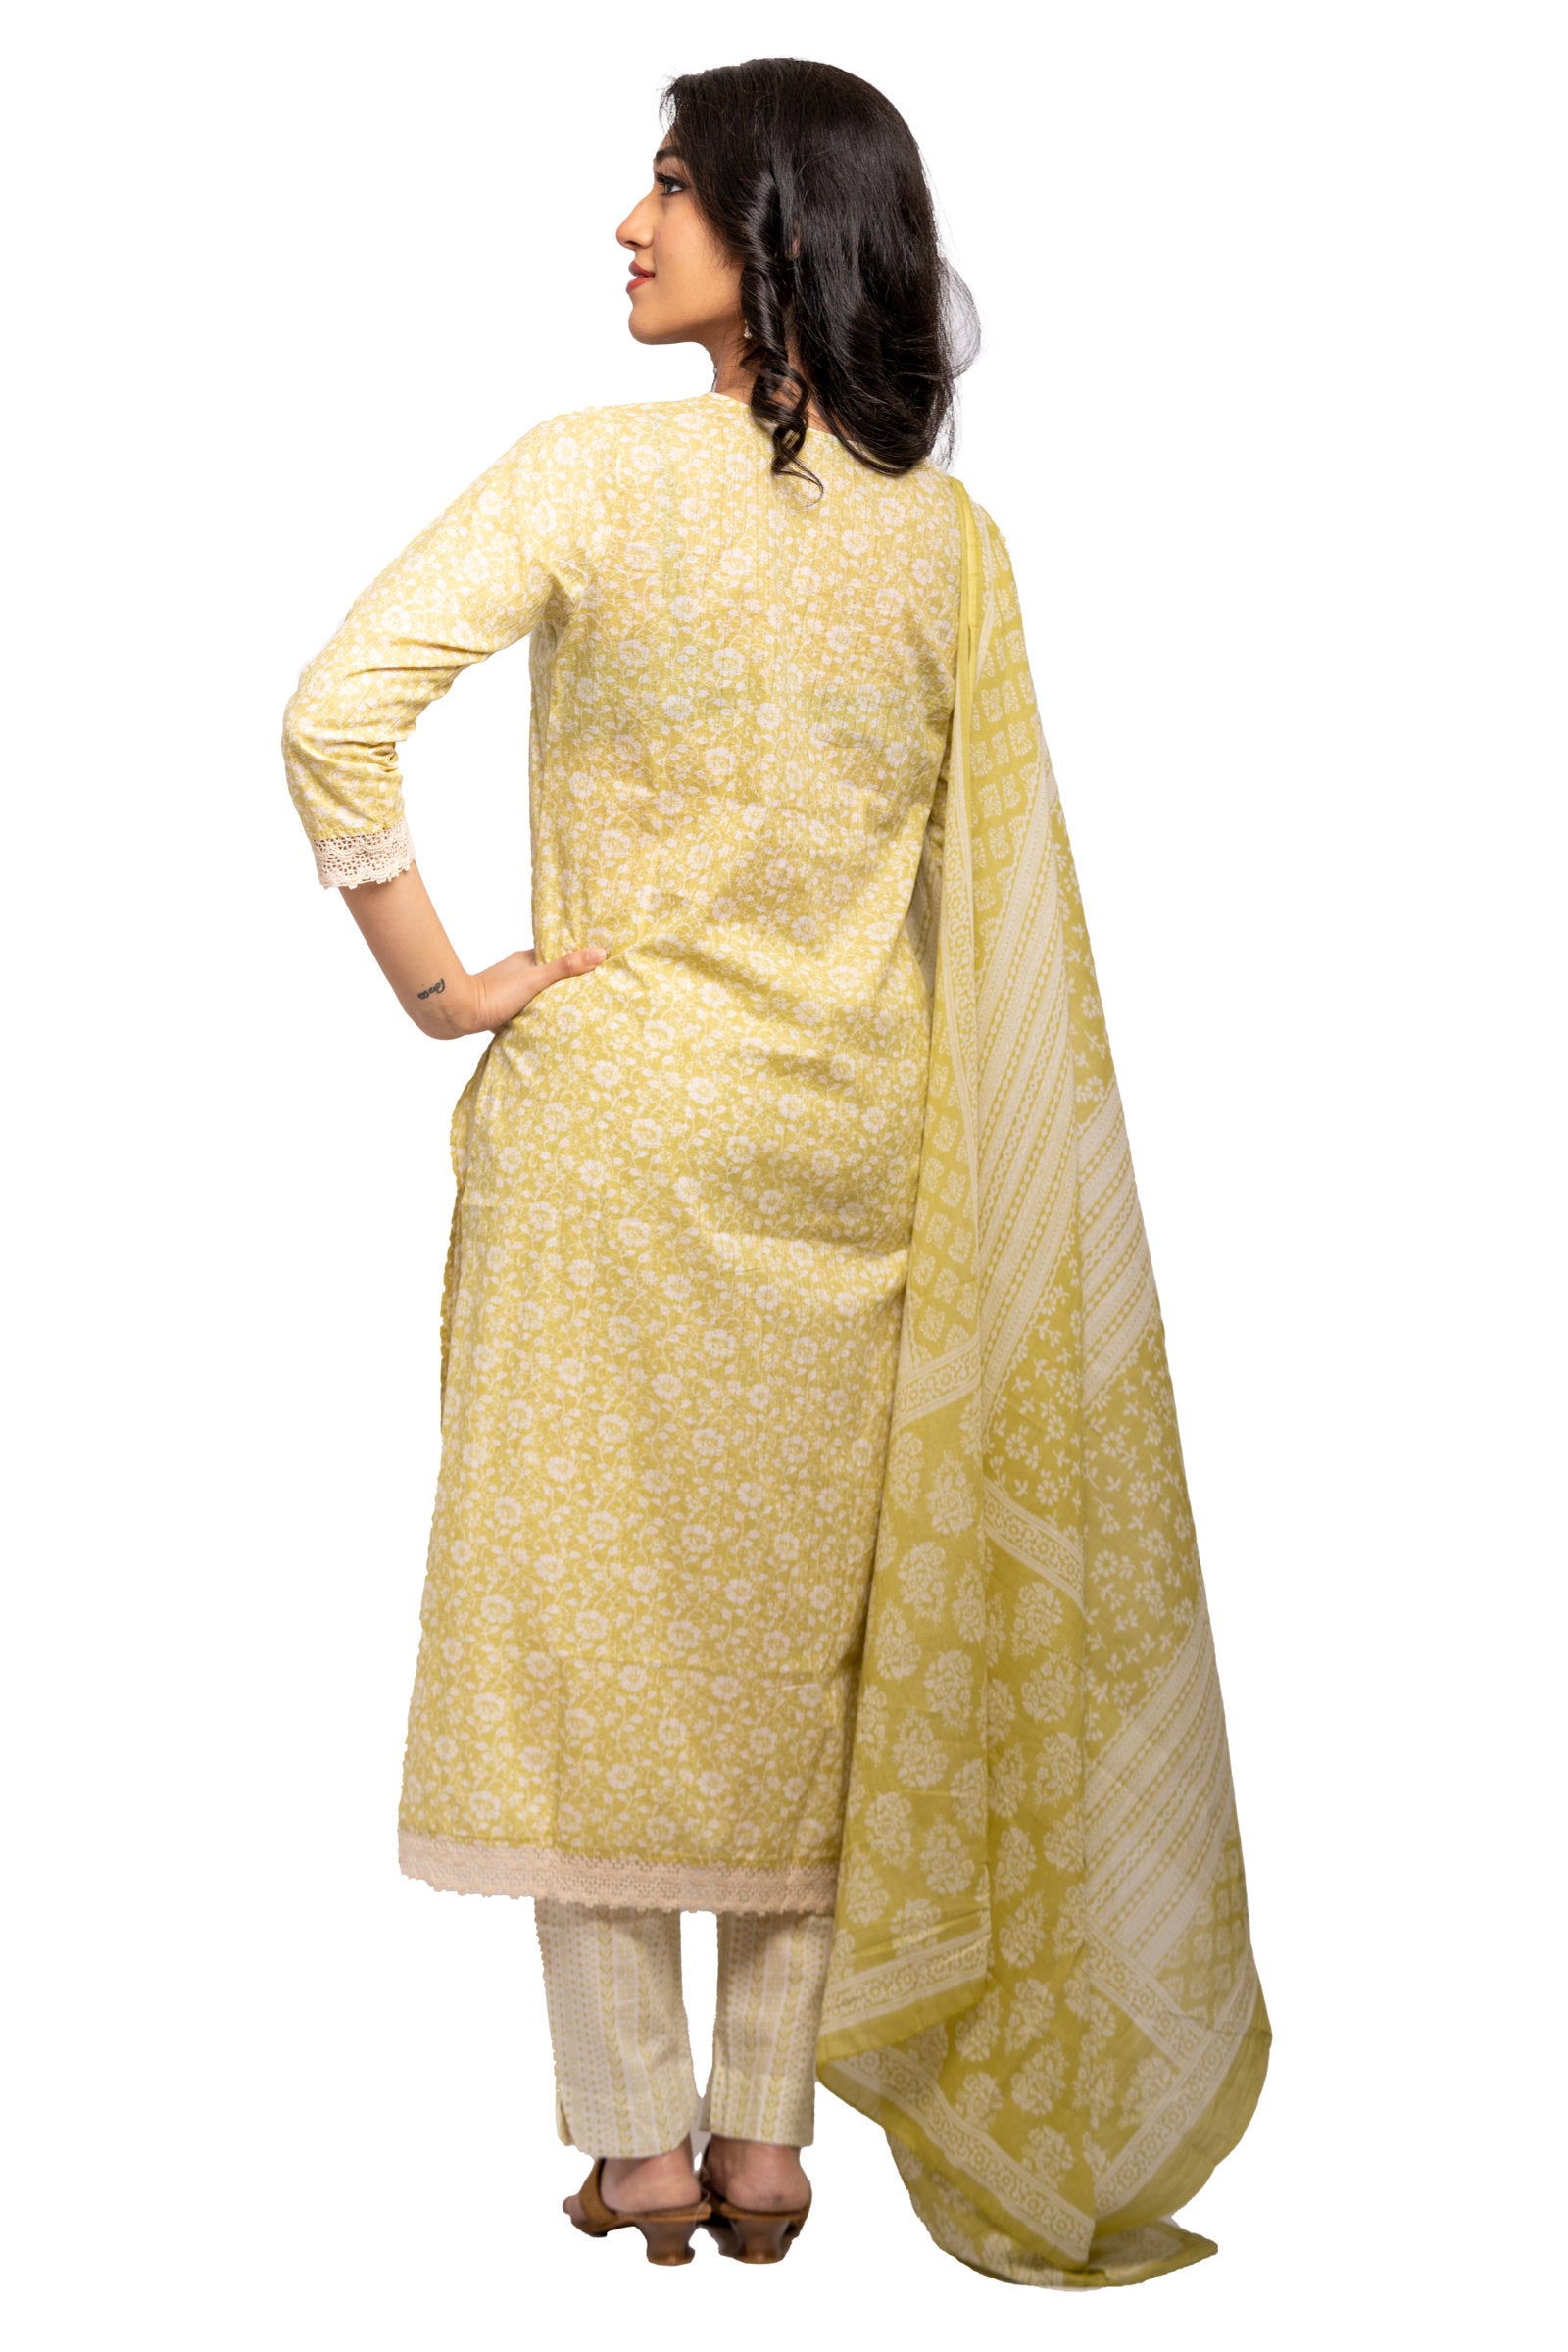 3 Piece Salwar - 100% Cotton pastel green salwar with white floral prints and light crochet work. White and pastel green 2 metre long dupatta and pant with floral prints matching the salwar.